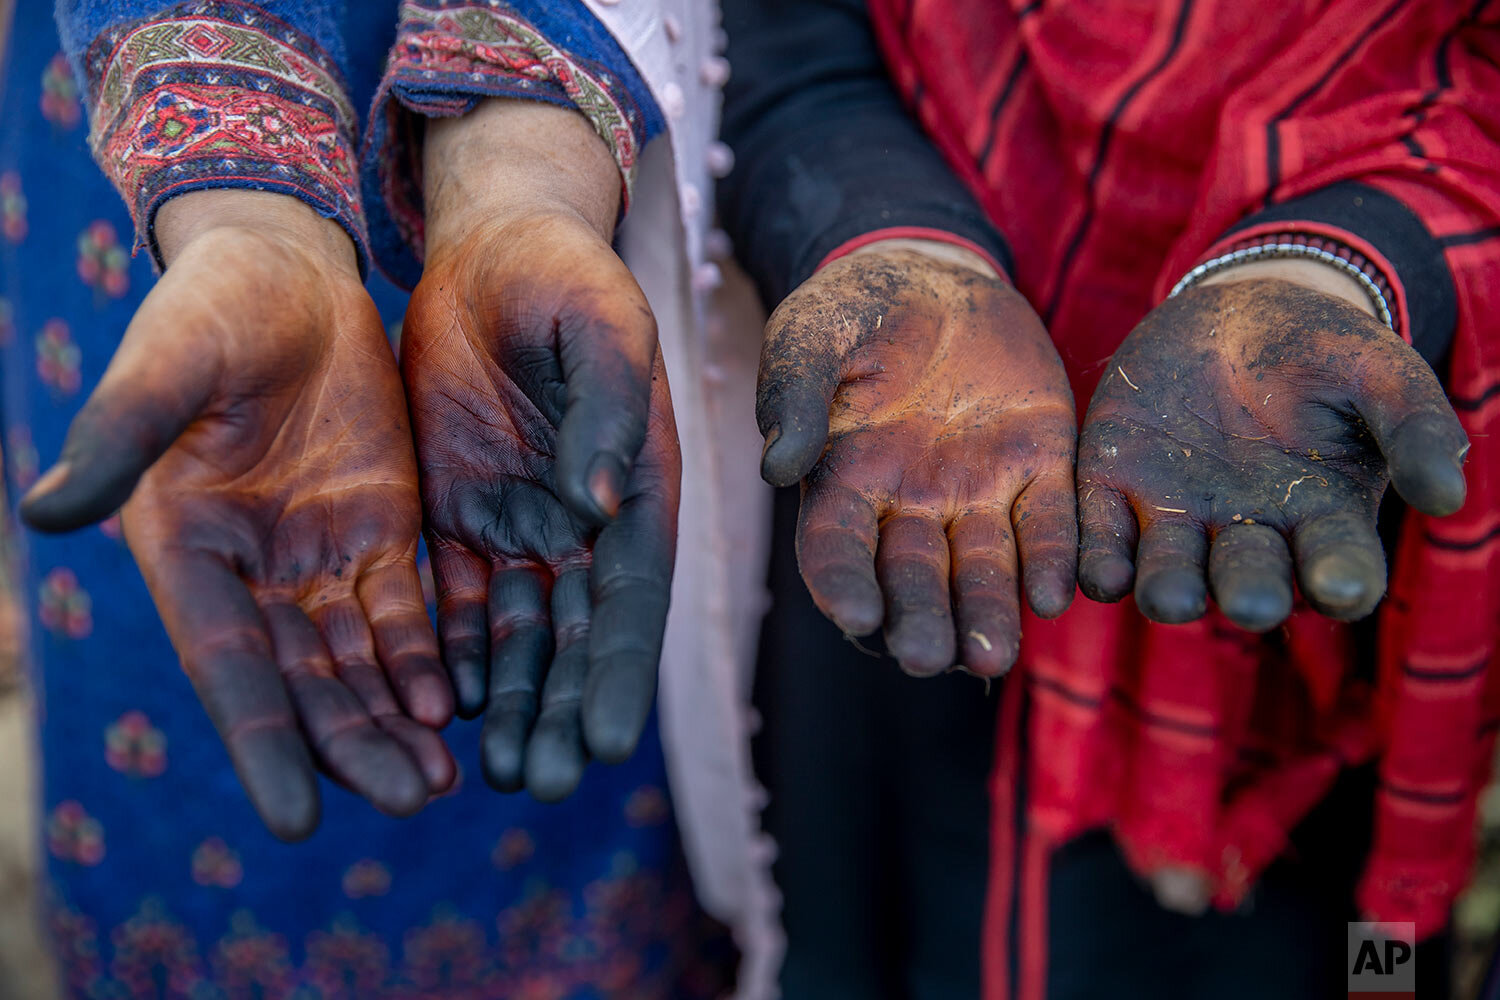  Kashmiri villagers show their hands stained by cleaning and shelling walnuts in Budgham area, northeast of Srinagar, Saturday, Sept. 25, 2021. (AP Photo/Dar Yasin) 